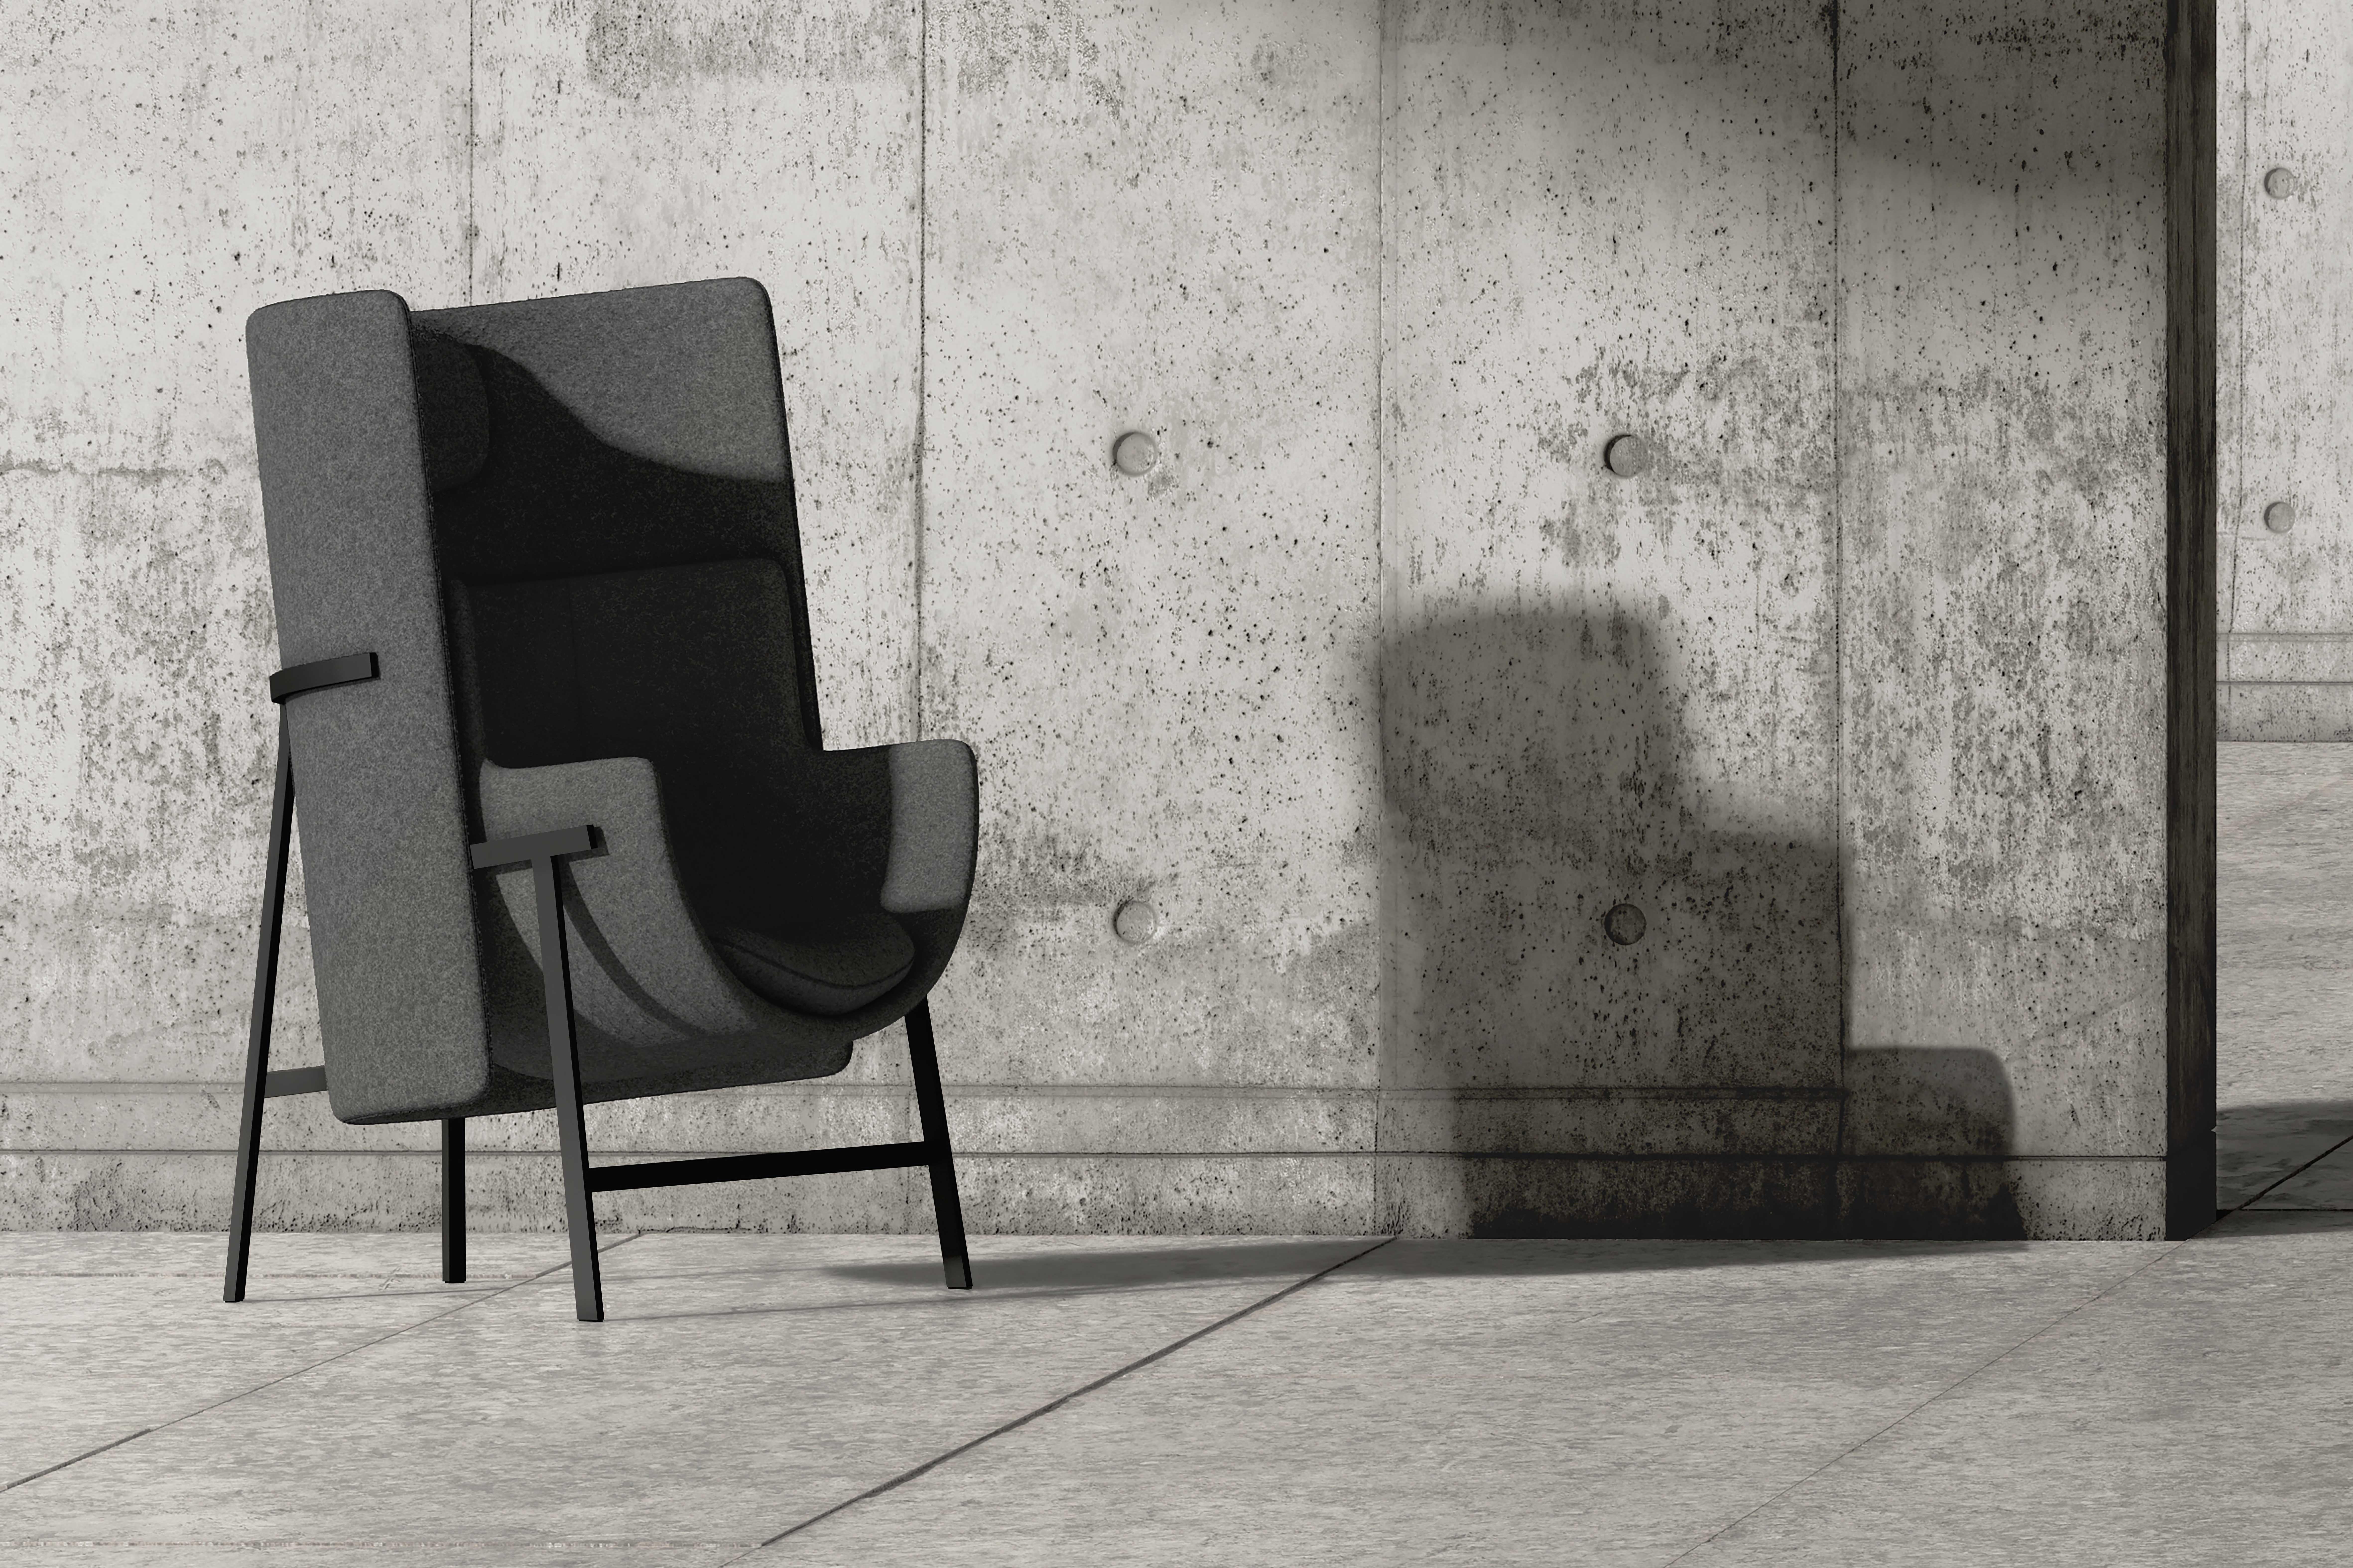 Kite's multilayered form combines a shield-like statement backrest and deeply proportioned curved seat in this Stellar Works' highback version. Even at that, Nendo designer-architect Oki Sato delivers a compact armchair designed with the